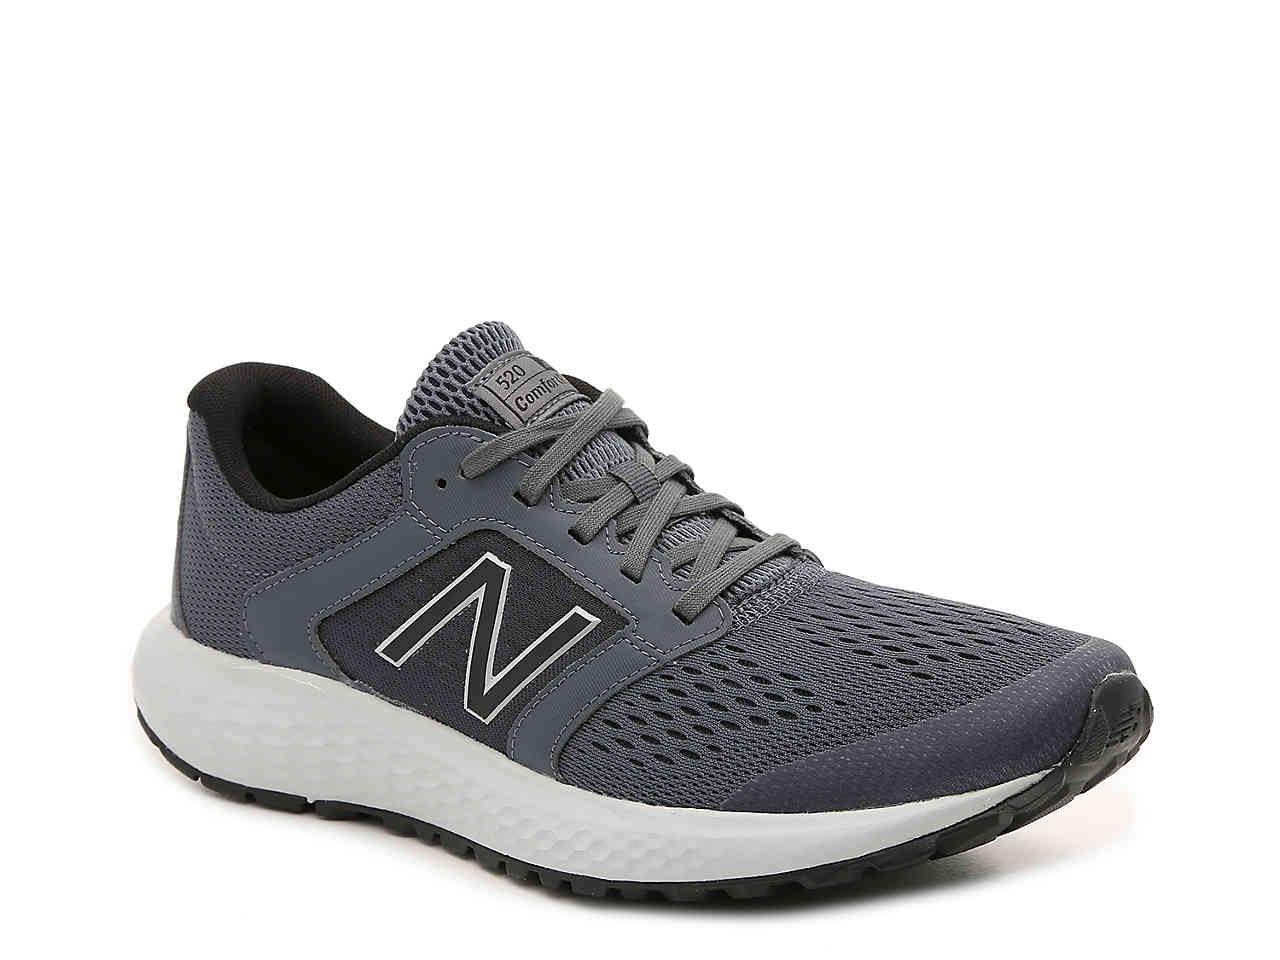 New Balance Synthetic 520 Comfortride Lightweight Running Shoe in Grey ...